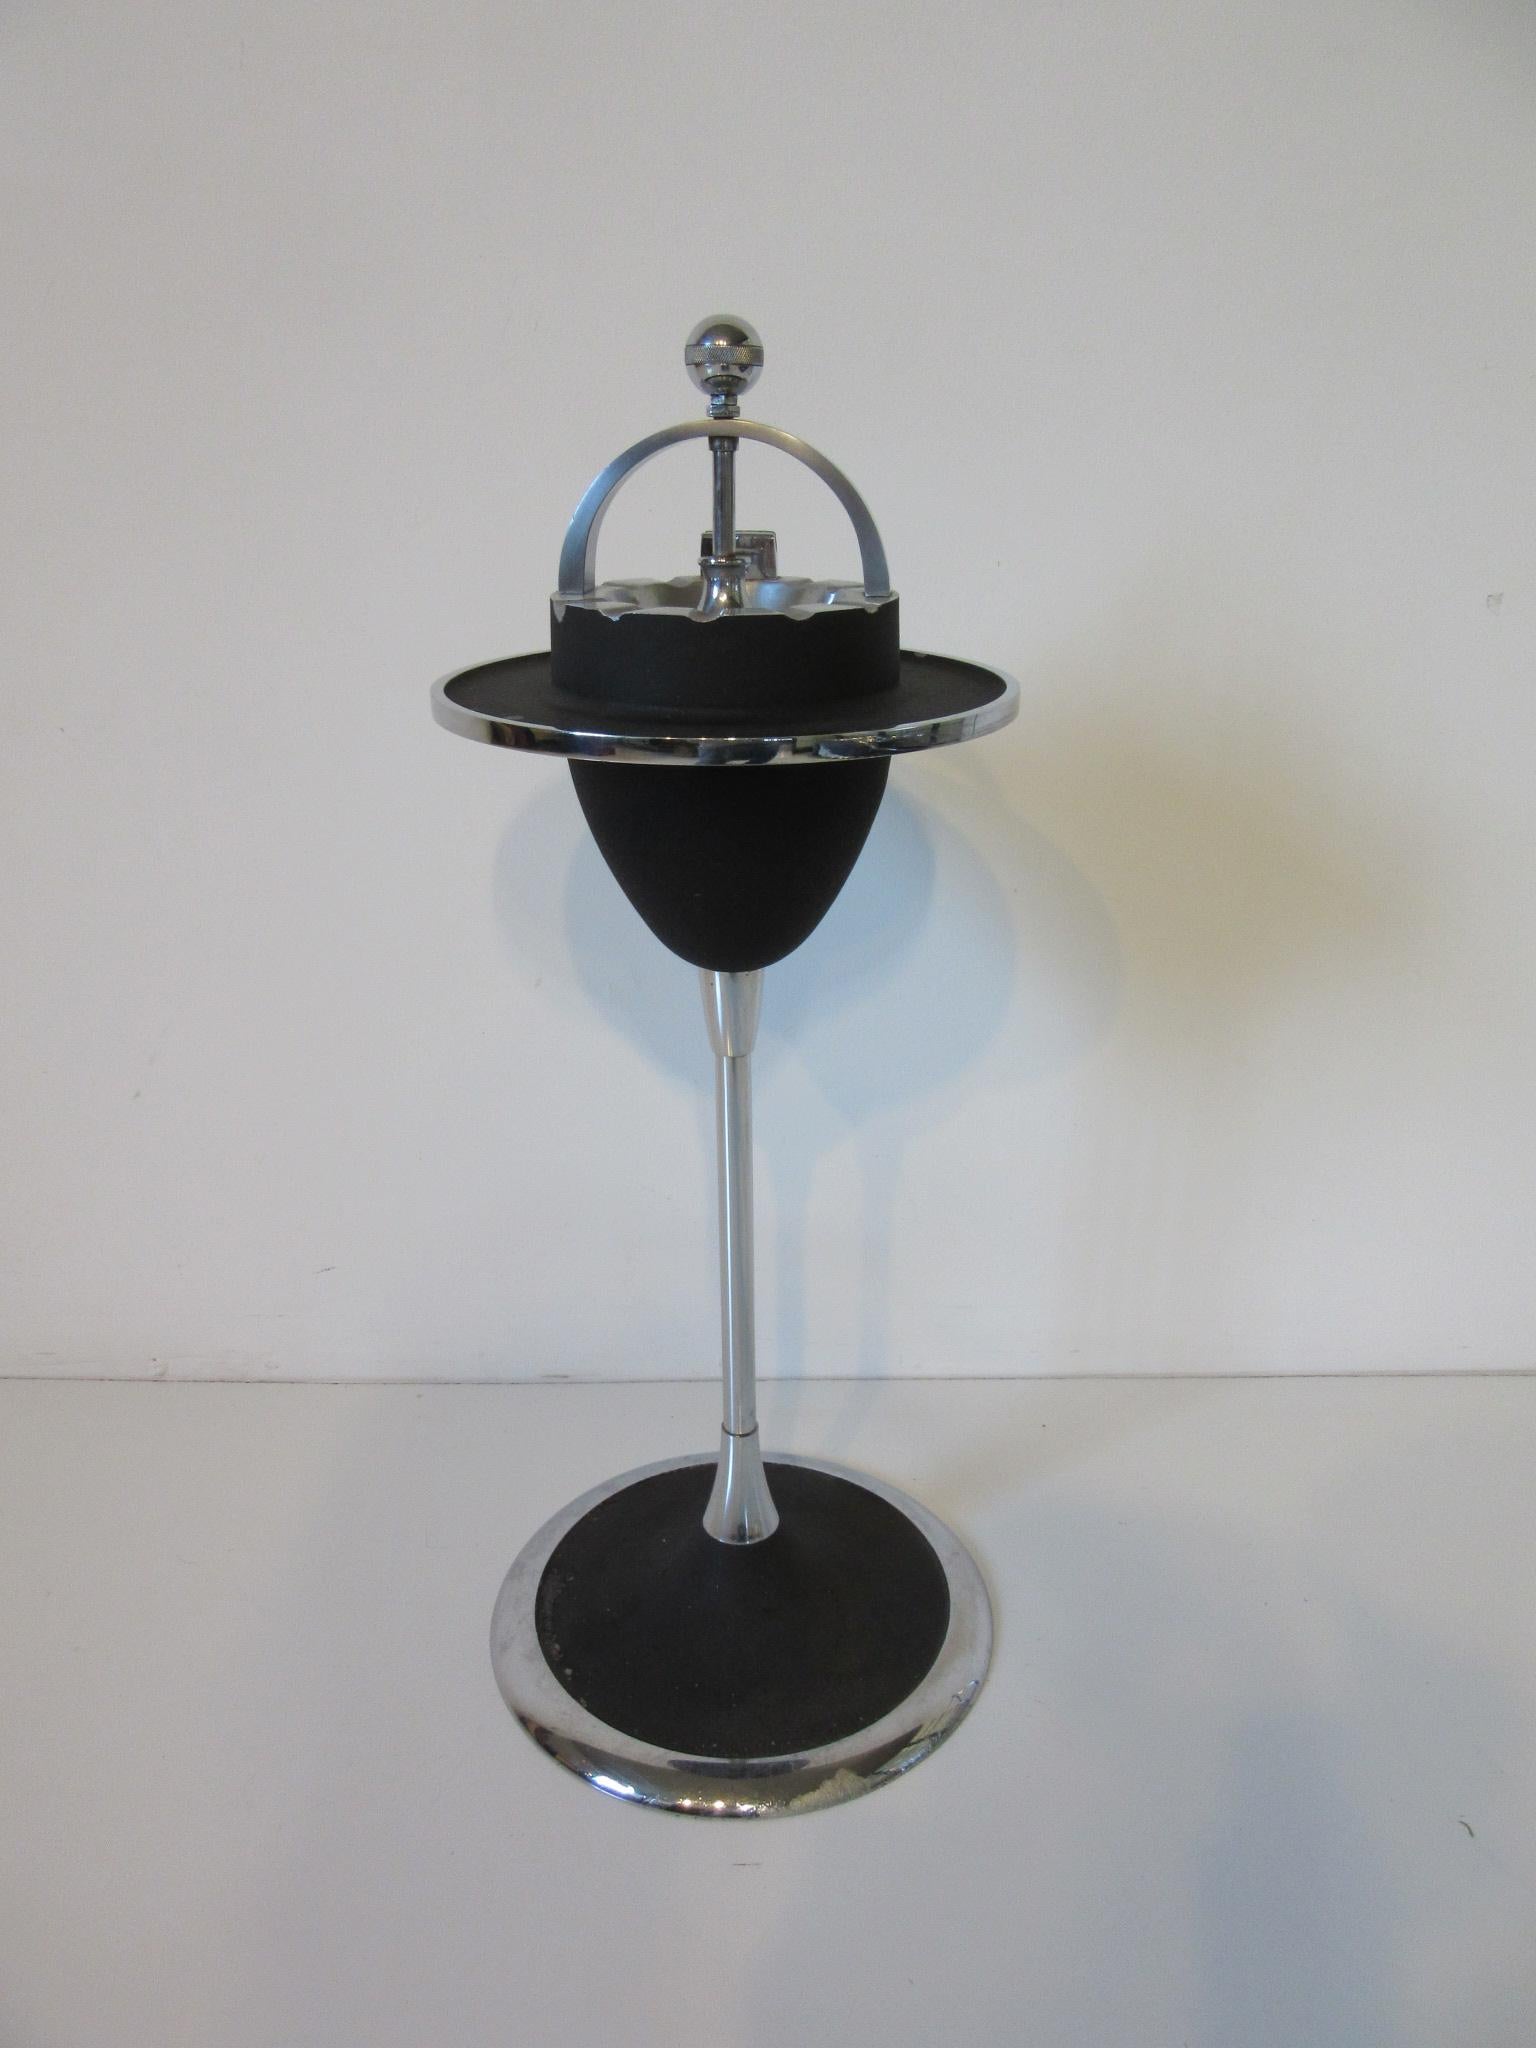 Art Deco train car solid steel, nickel and satin black painted ash tray stand with matchbox holder and handle. A strong styling statement from the period of train cars and Industrial design, manufactured by the W.J. Campbell Company Indianapolis.